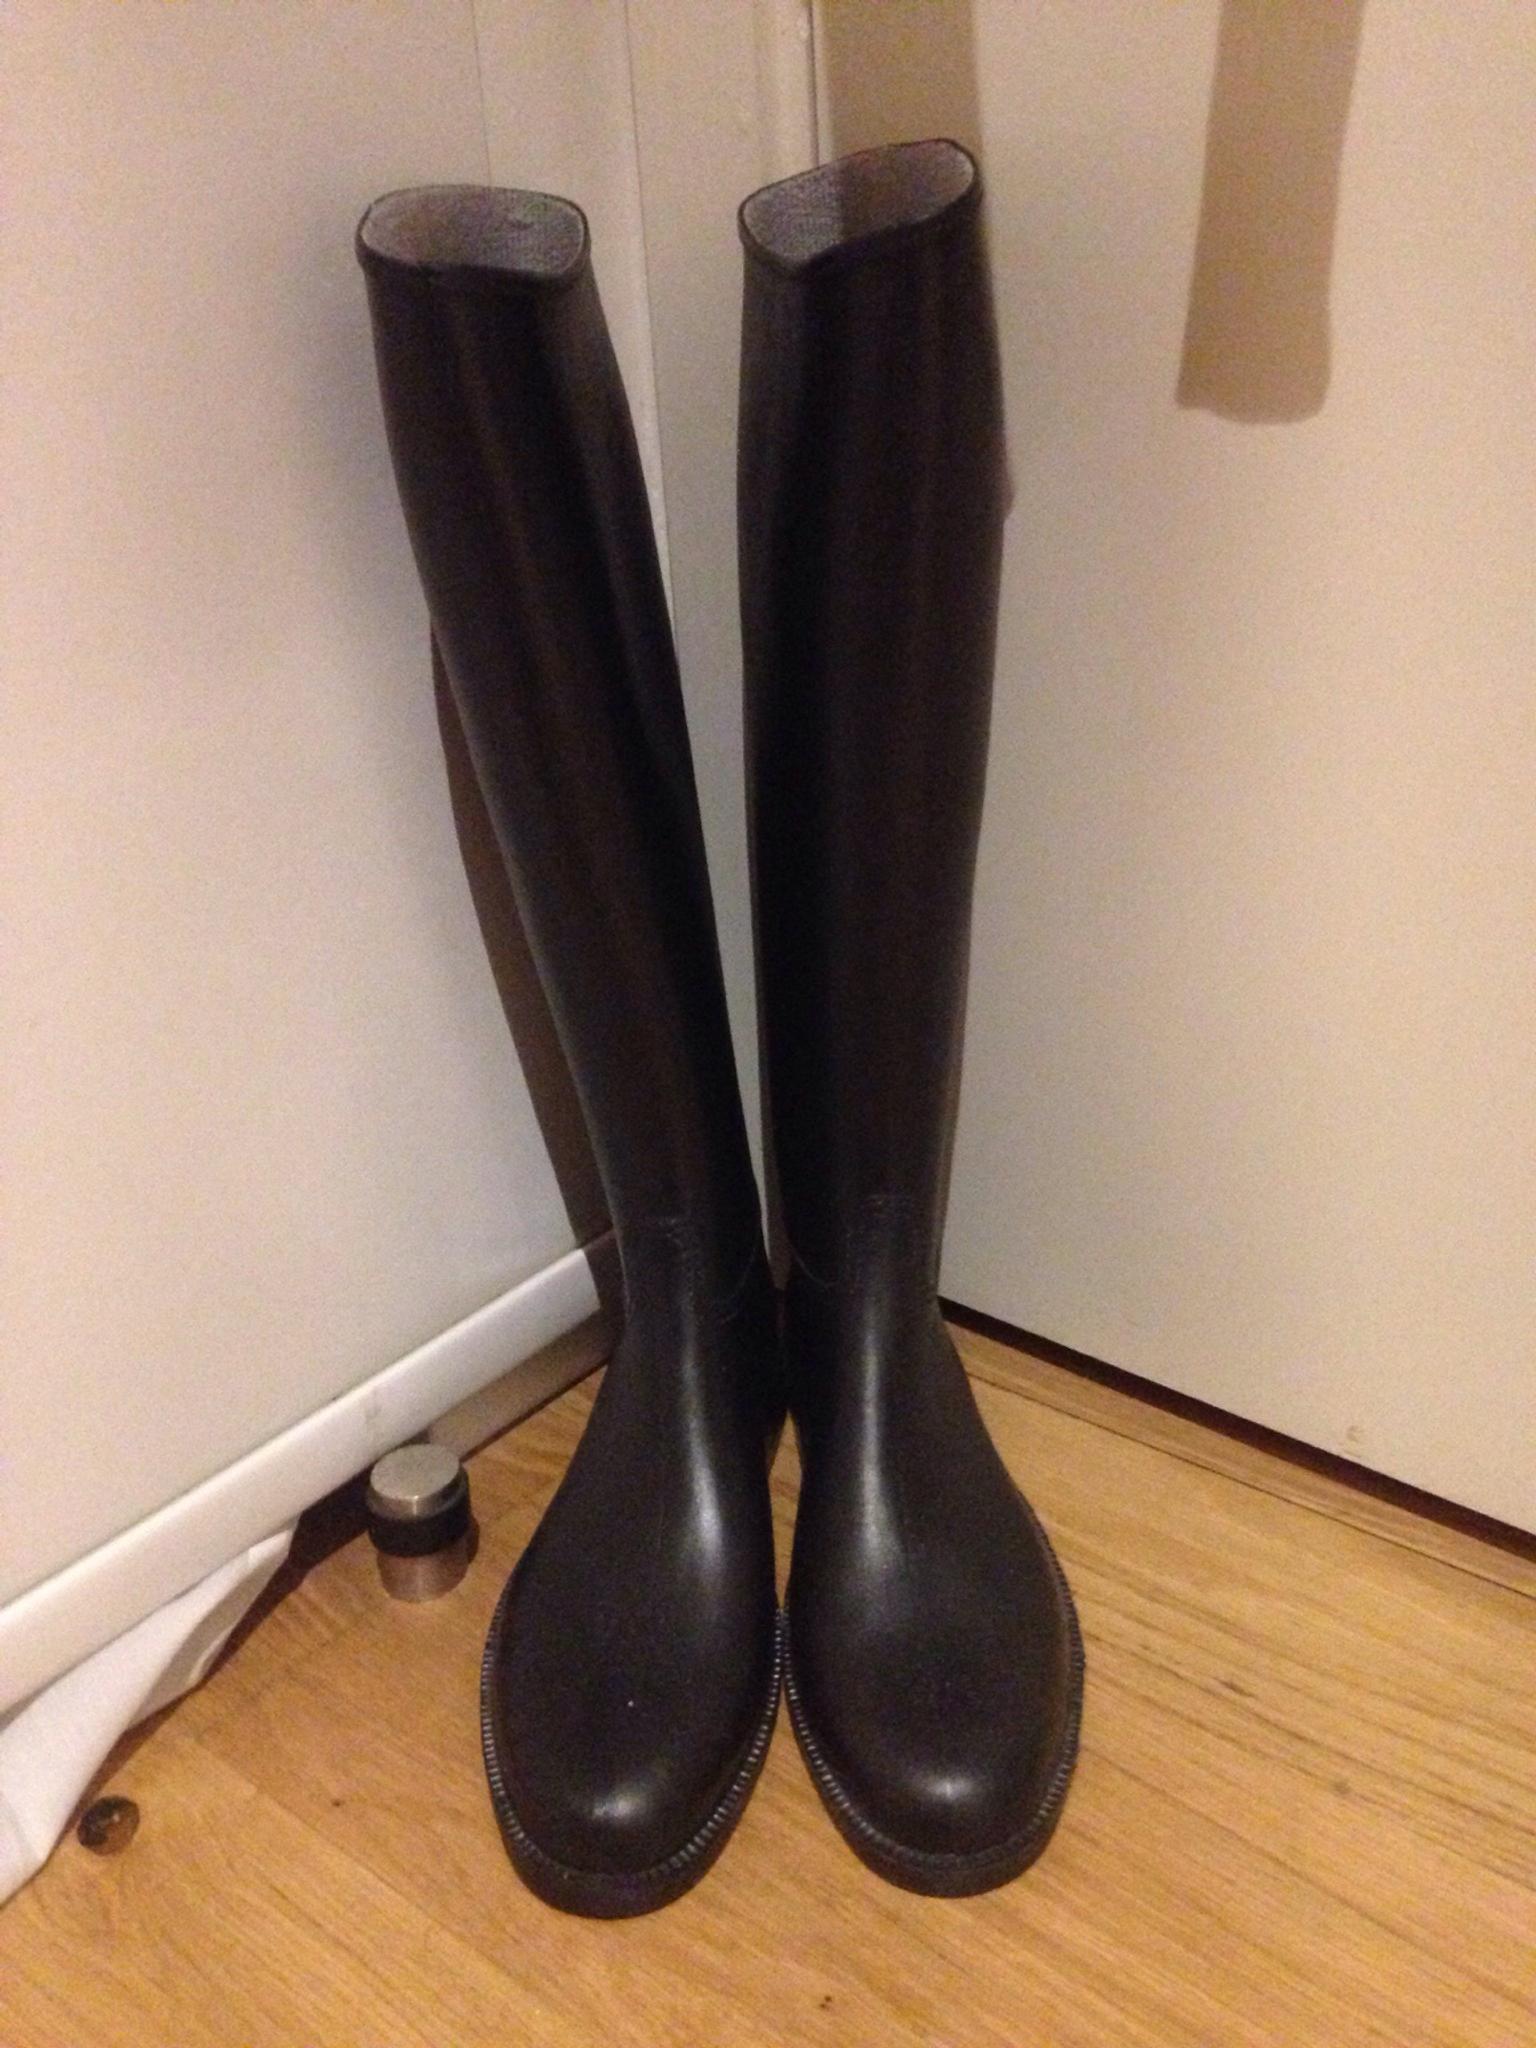 Horse riding boots cheap in N19 London 